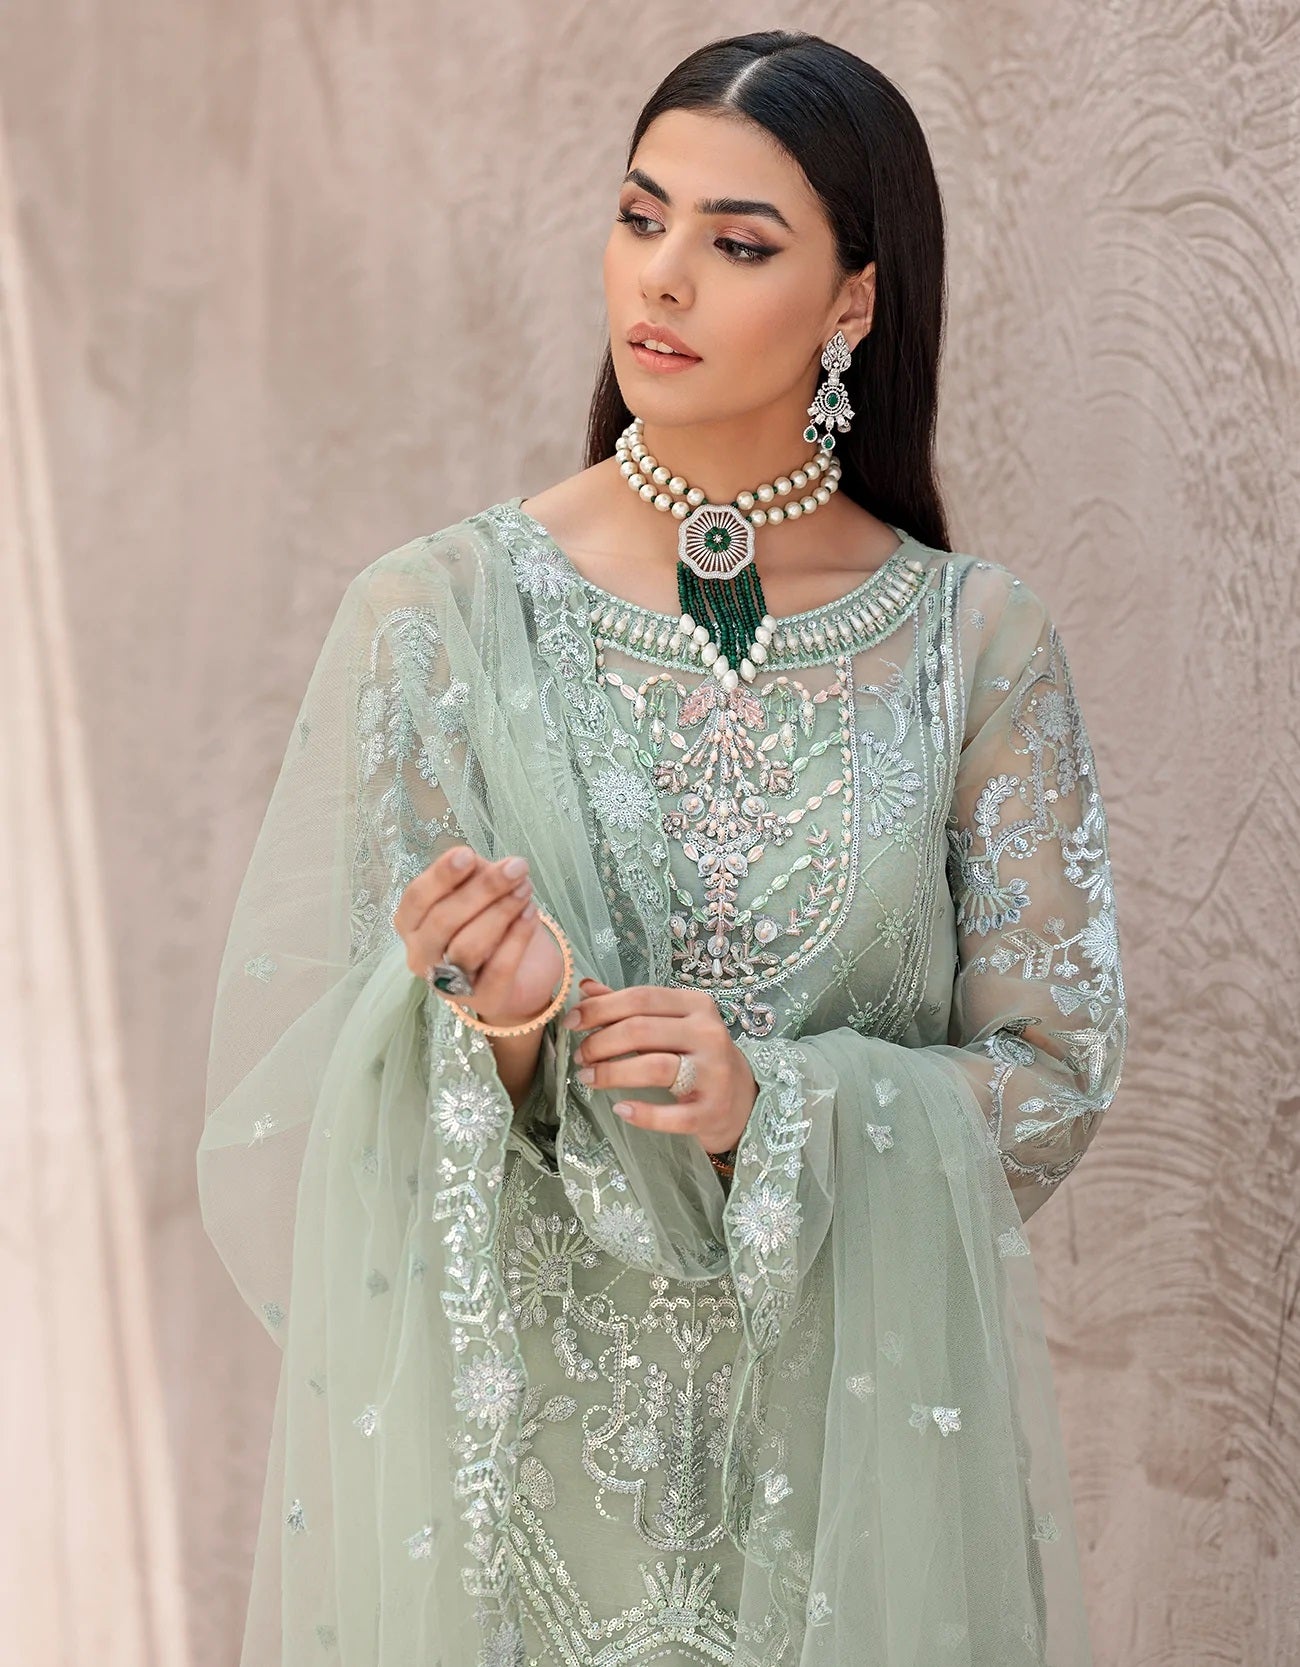 Nafasat By Emaan Adeel Embroidered Organza Suits Unstitched 3 Piece NF-07